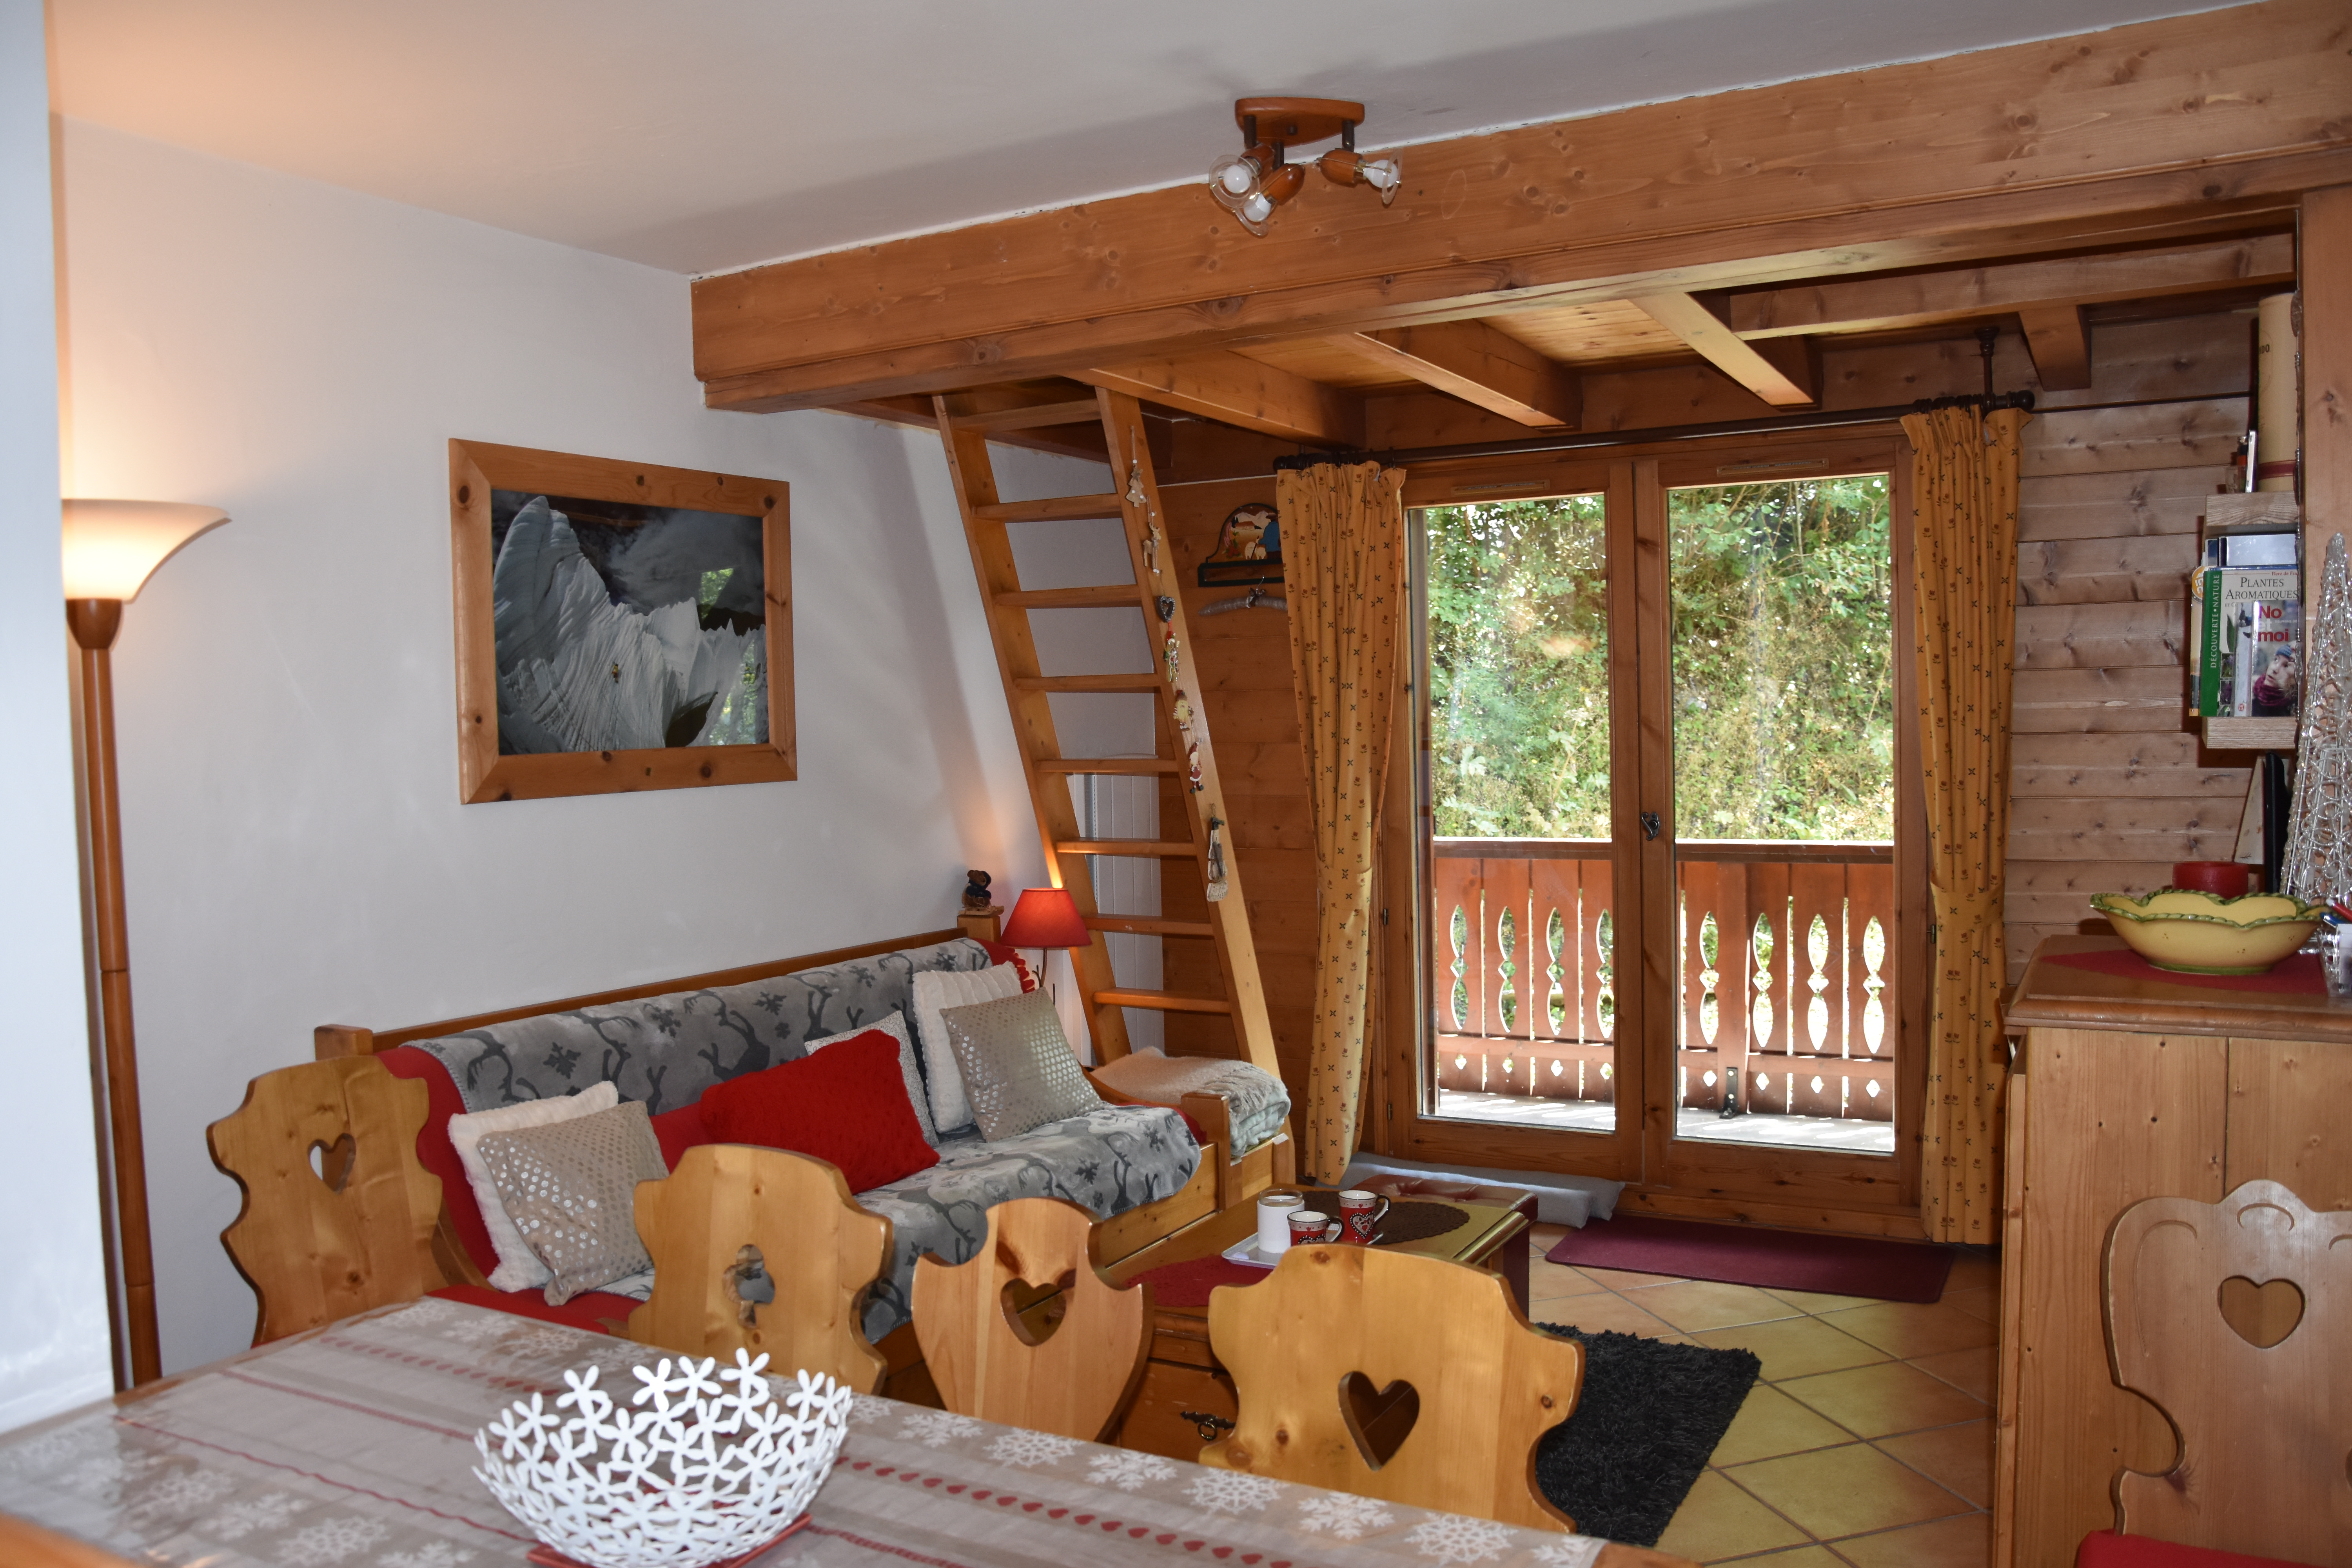 Sale : Cosy interior, mountain charm and atmosphere